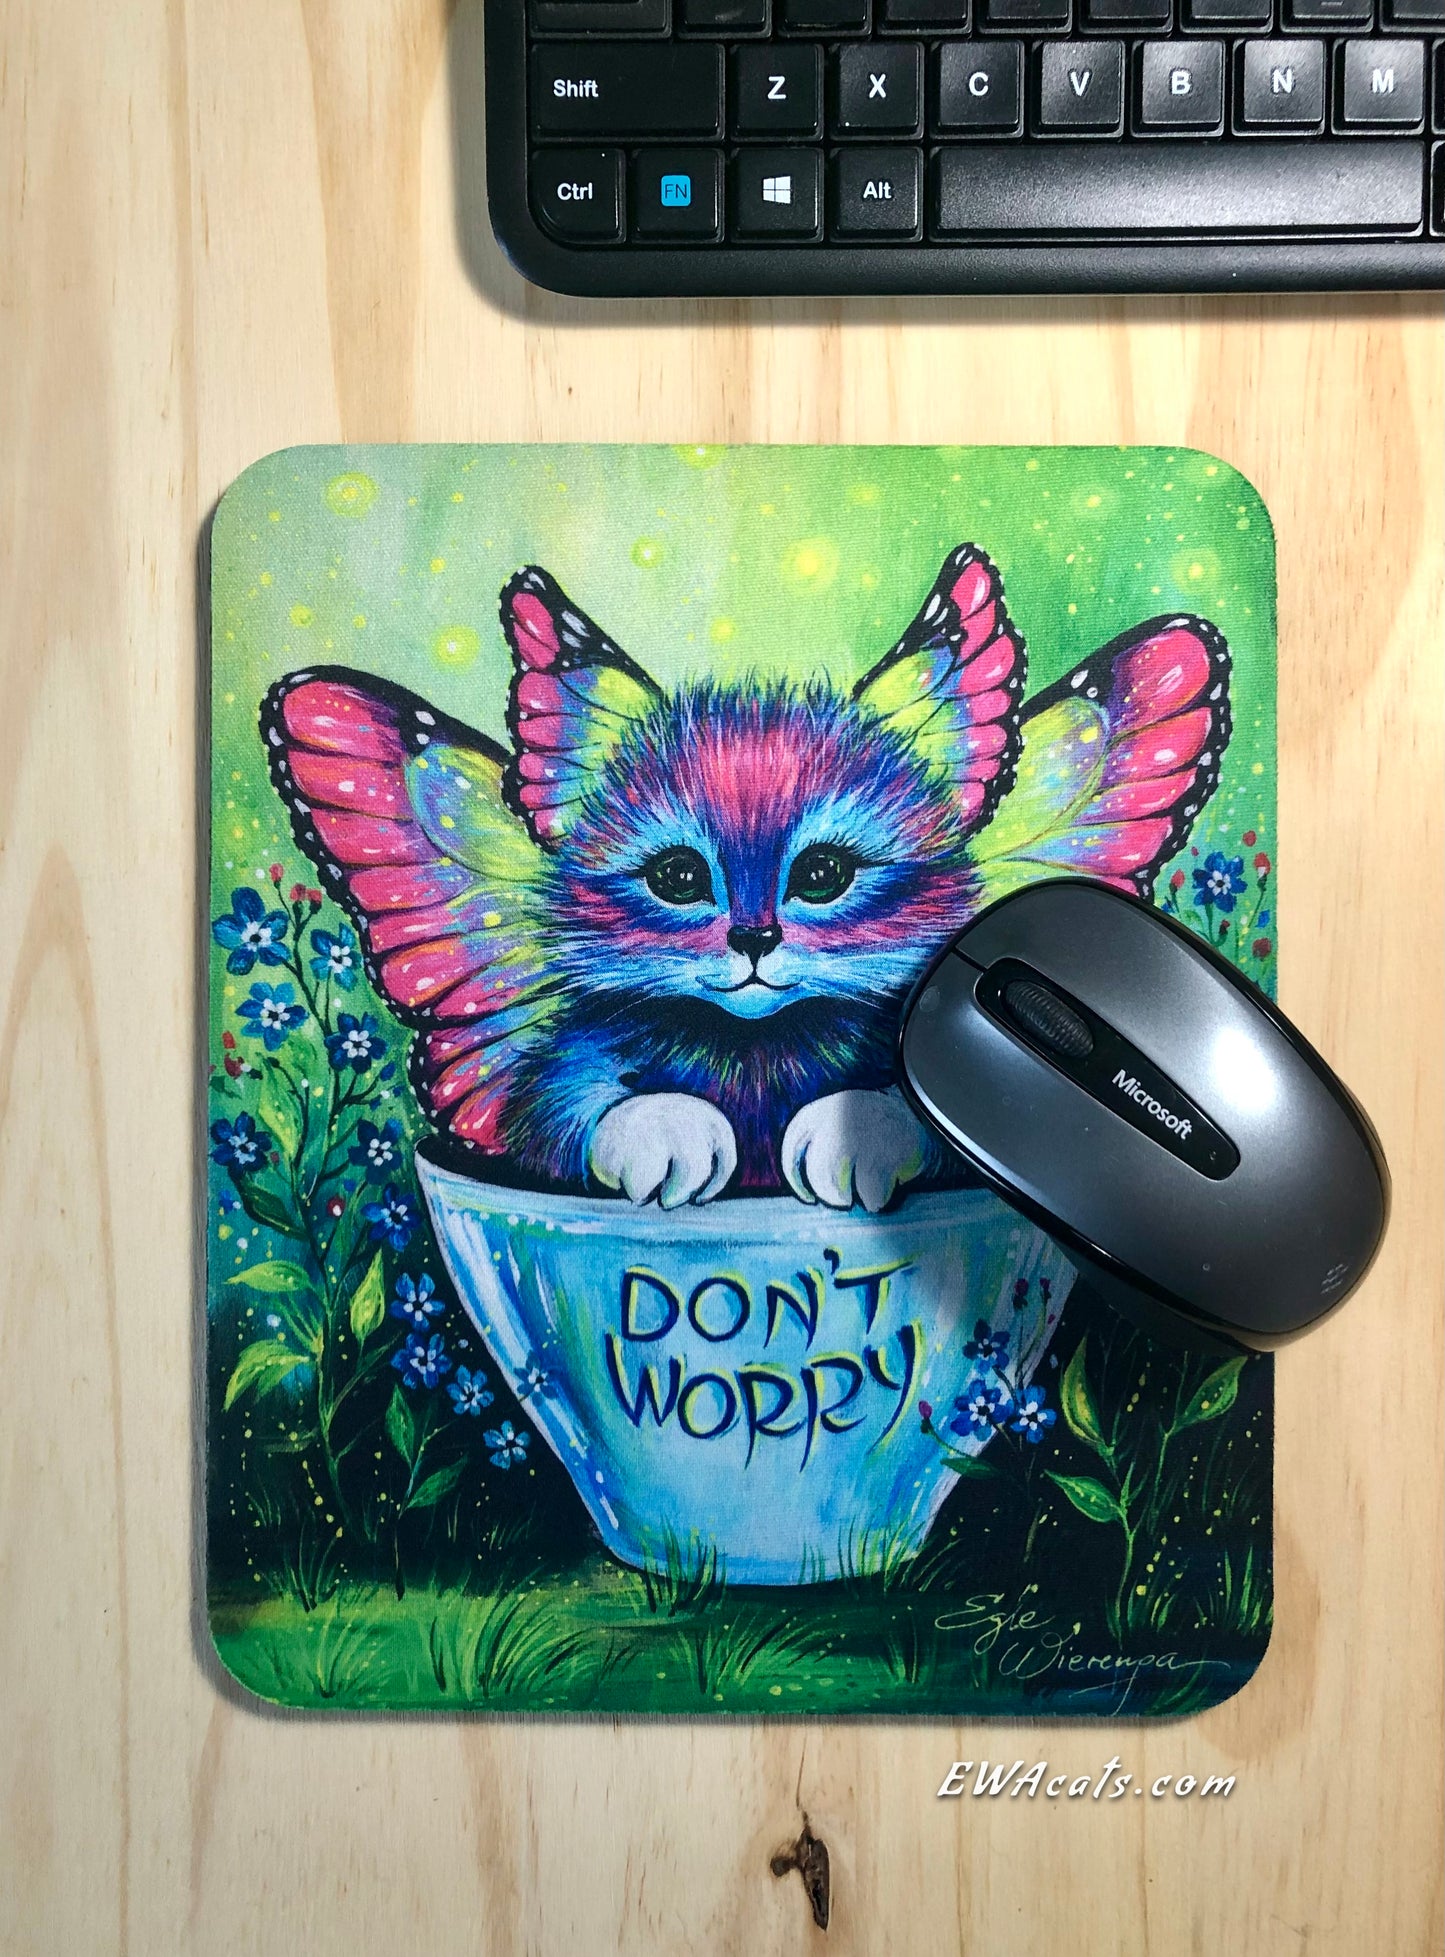 Mouse Pad "Don't Worry!"